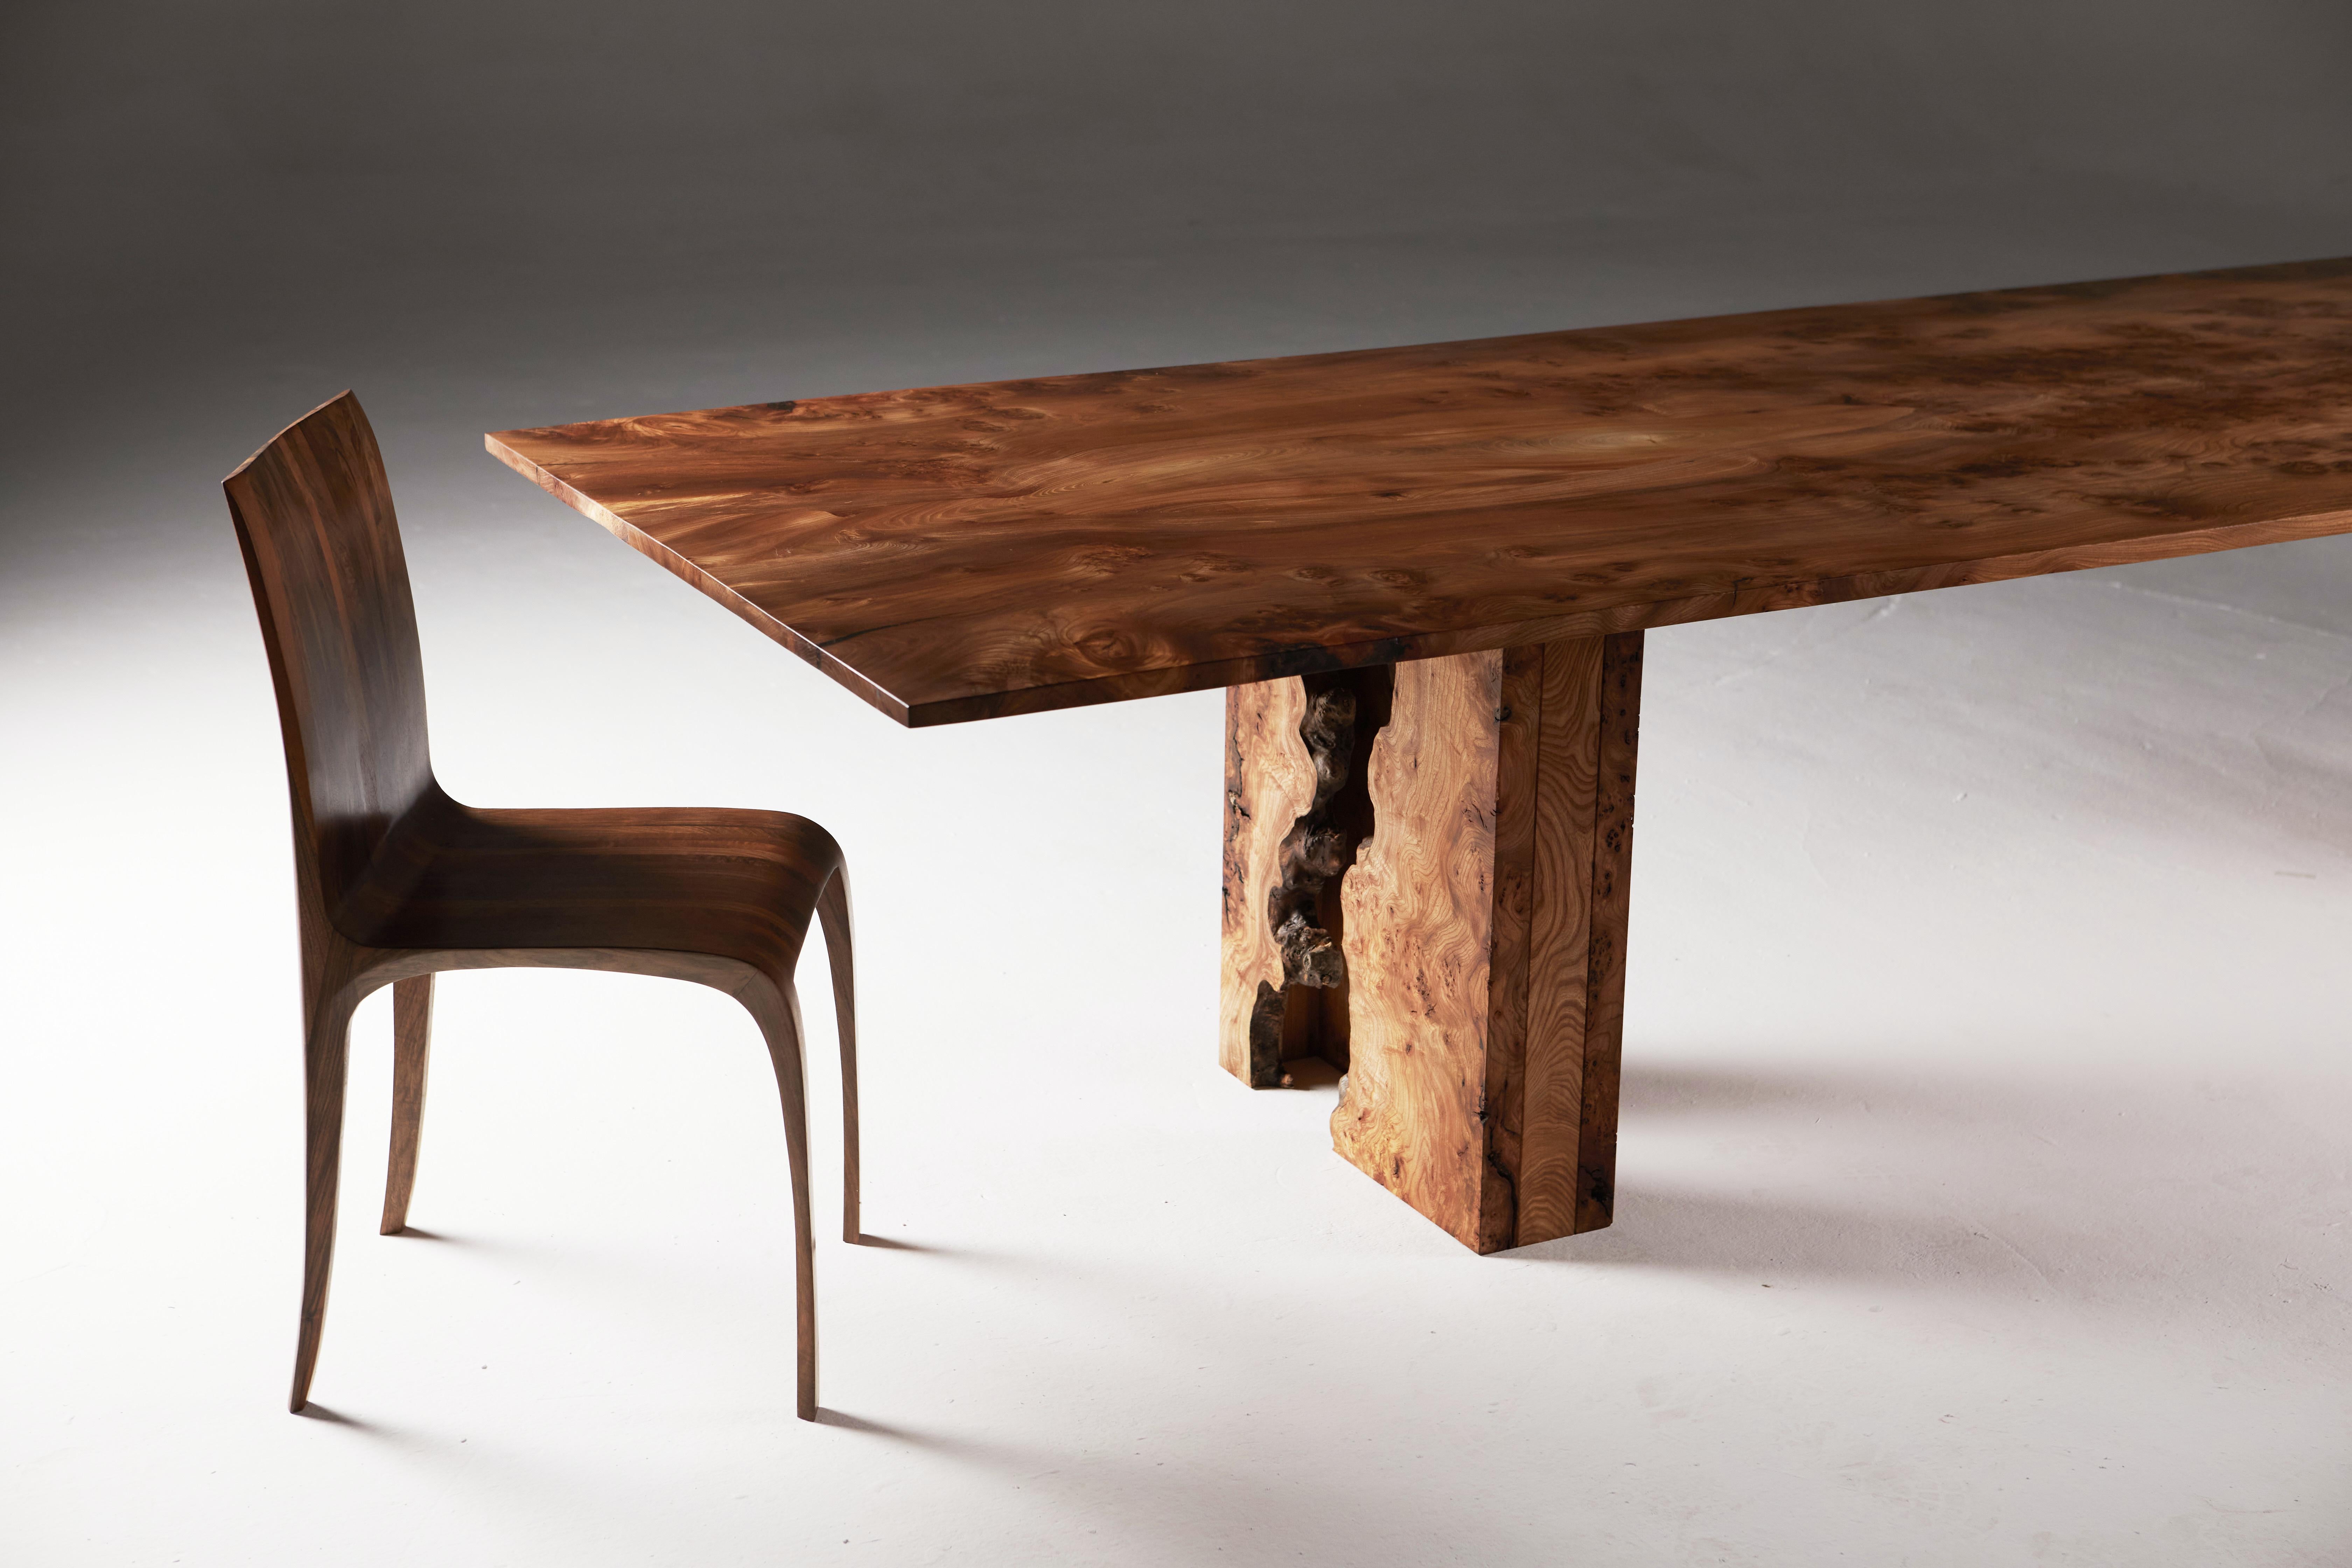 Scottish Burr Elm Table with Inverted Live Edge Legs and Book-matched Top.  8